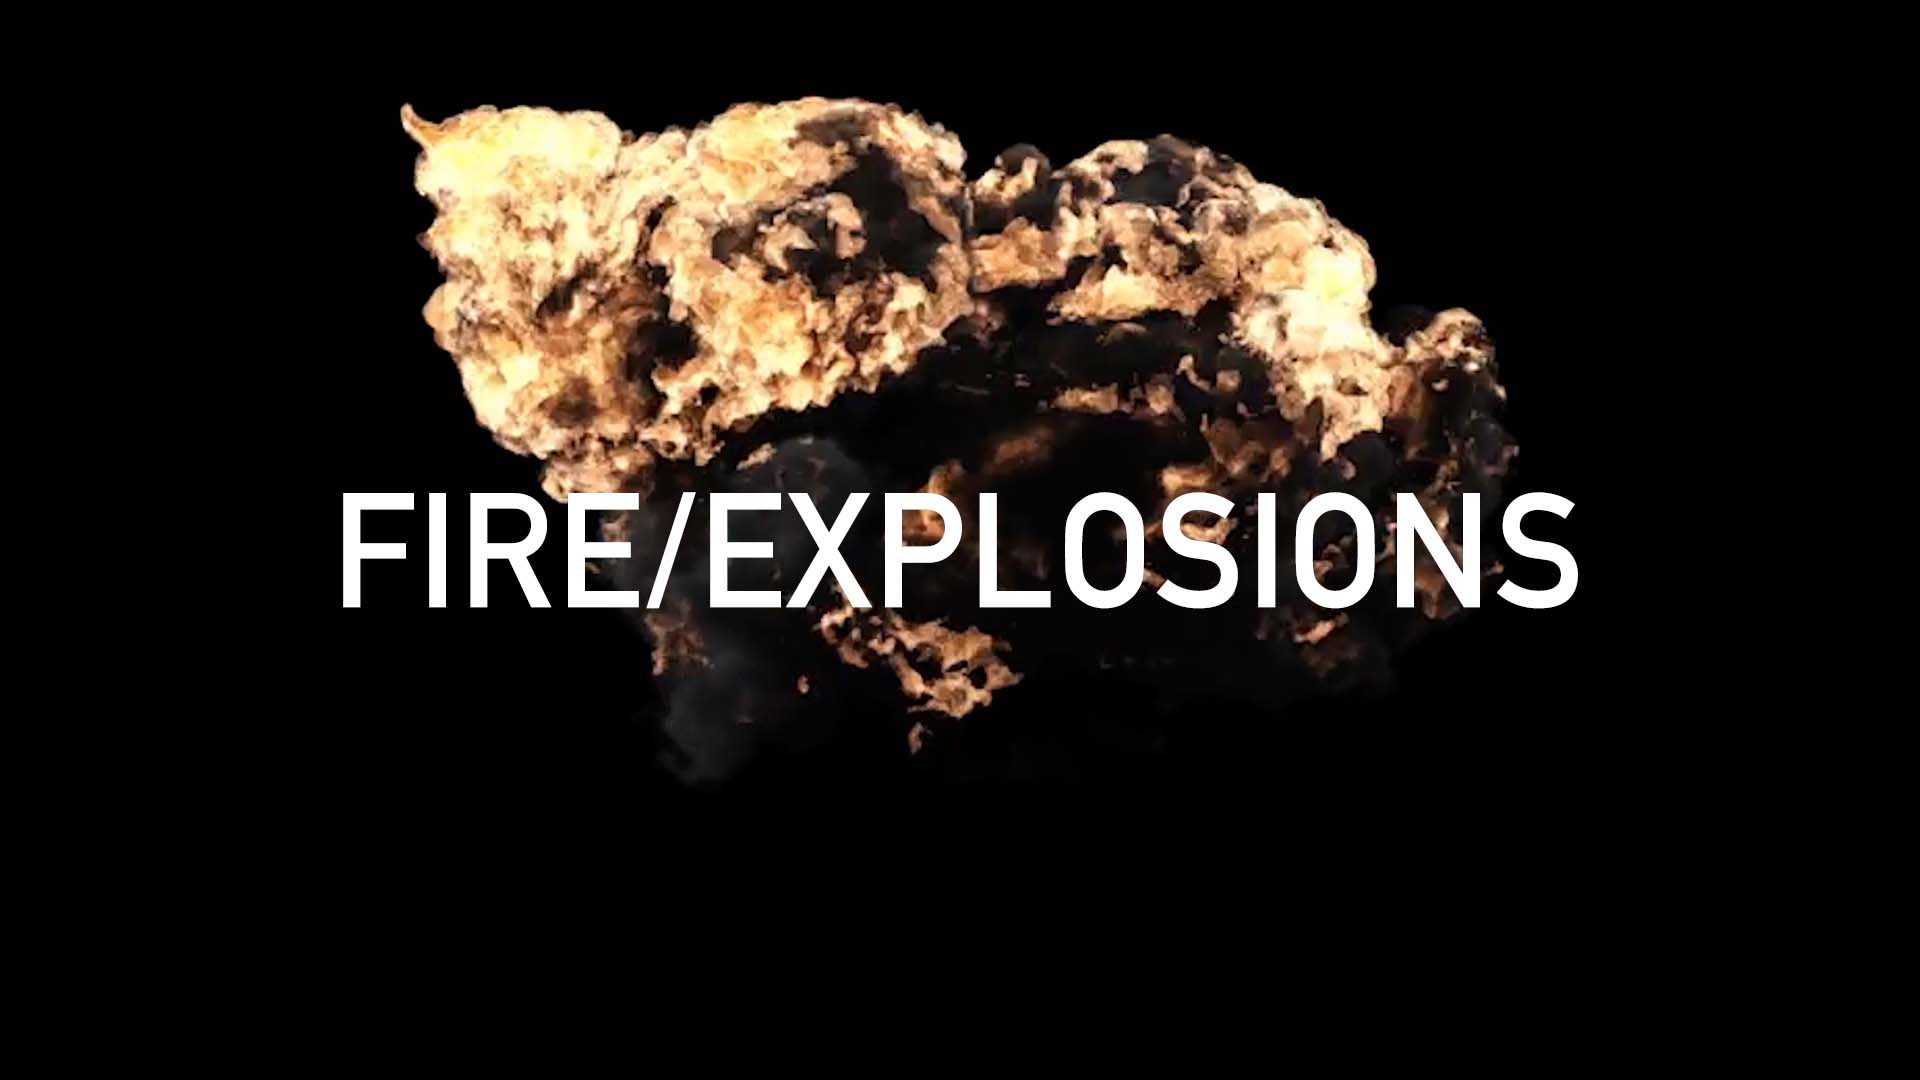 FIRE/EXPLOSIONS